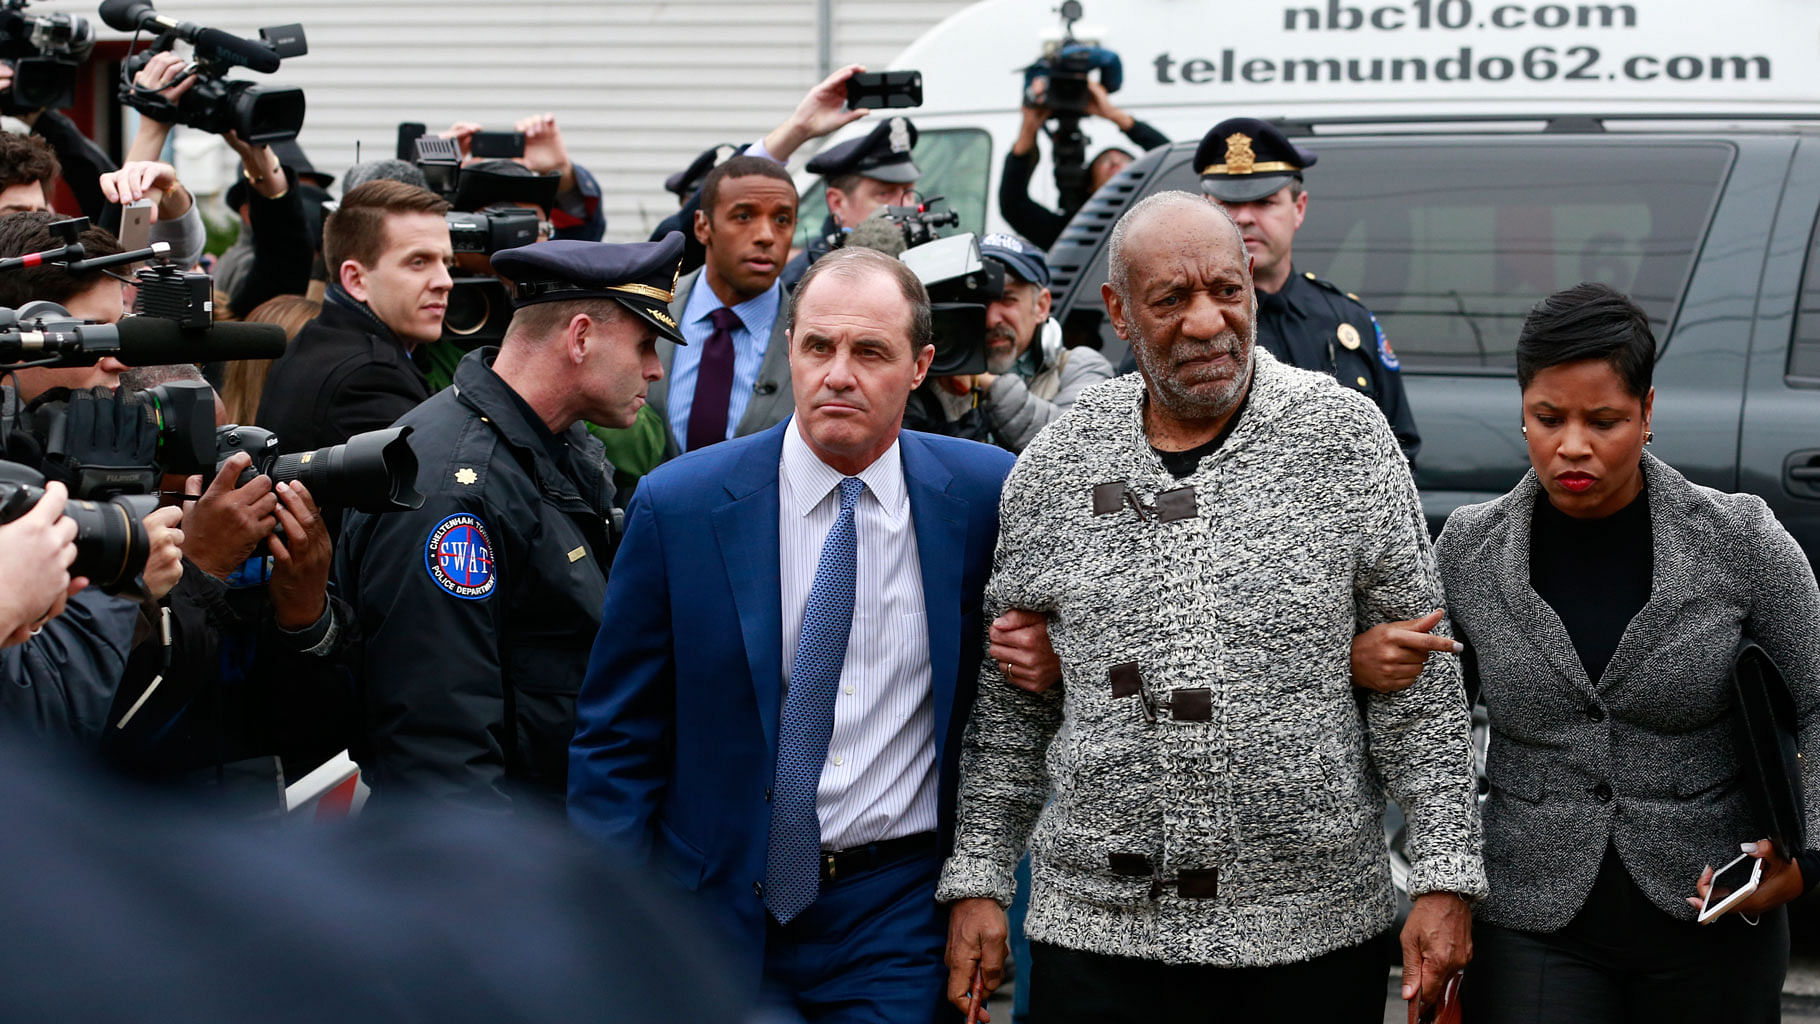 Actor and comedian Bill Cosby is helped as he arrives for a court appearance, Wednesday, Dec. 30, 2015, in Elkins Park, Pa. (Photo: David Swanson/The Philadelphia Inquirer via AP)&nbsp;